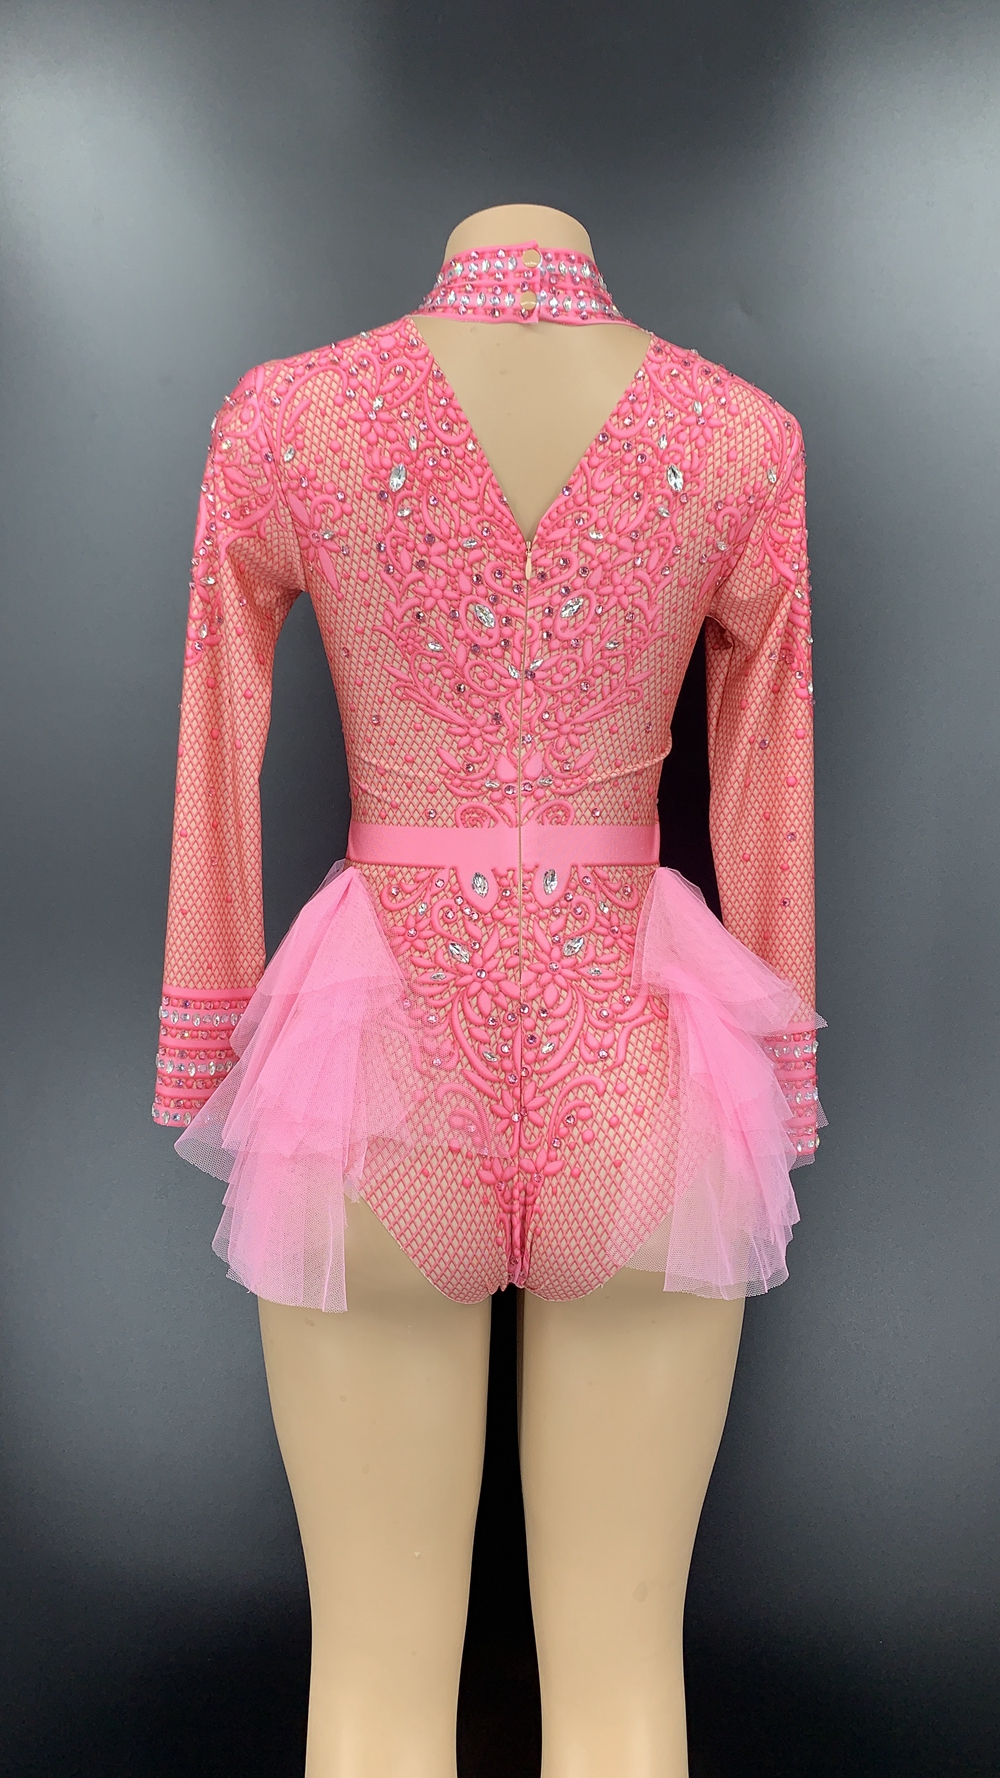 Red Silver Rhinestone Lace Long Sleeve Bodysuit Birthday Celebrate Prom Outfit Women Dancer Singer Performance Show Stage Wear